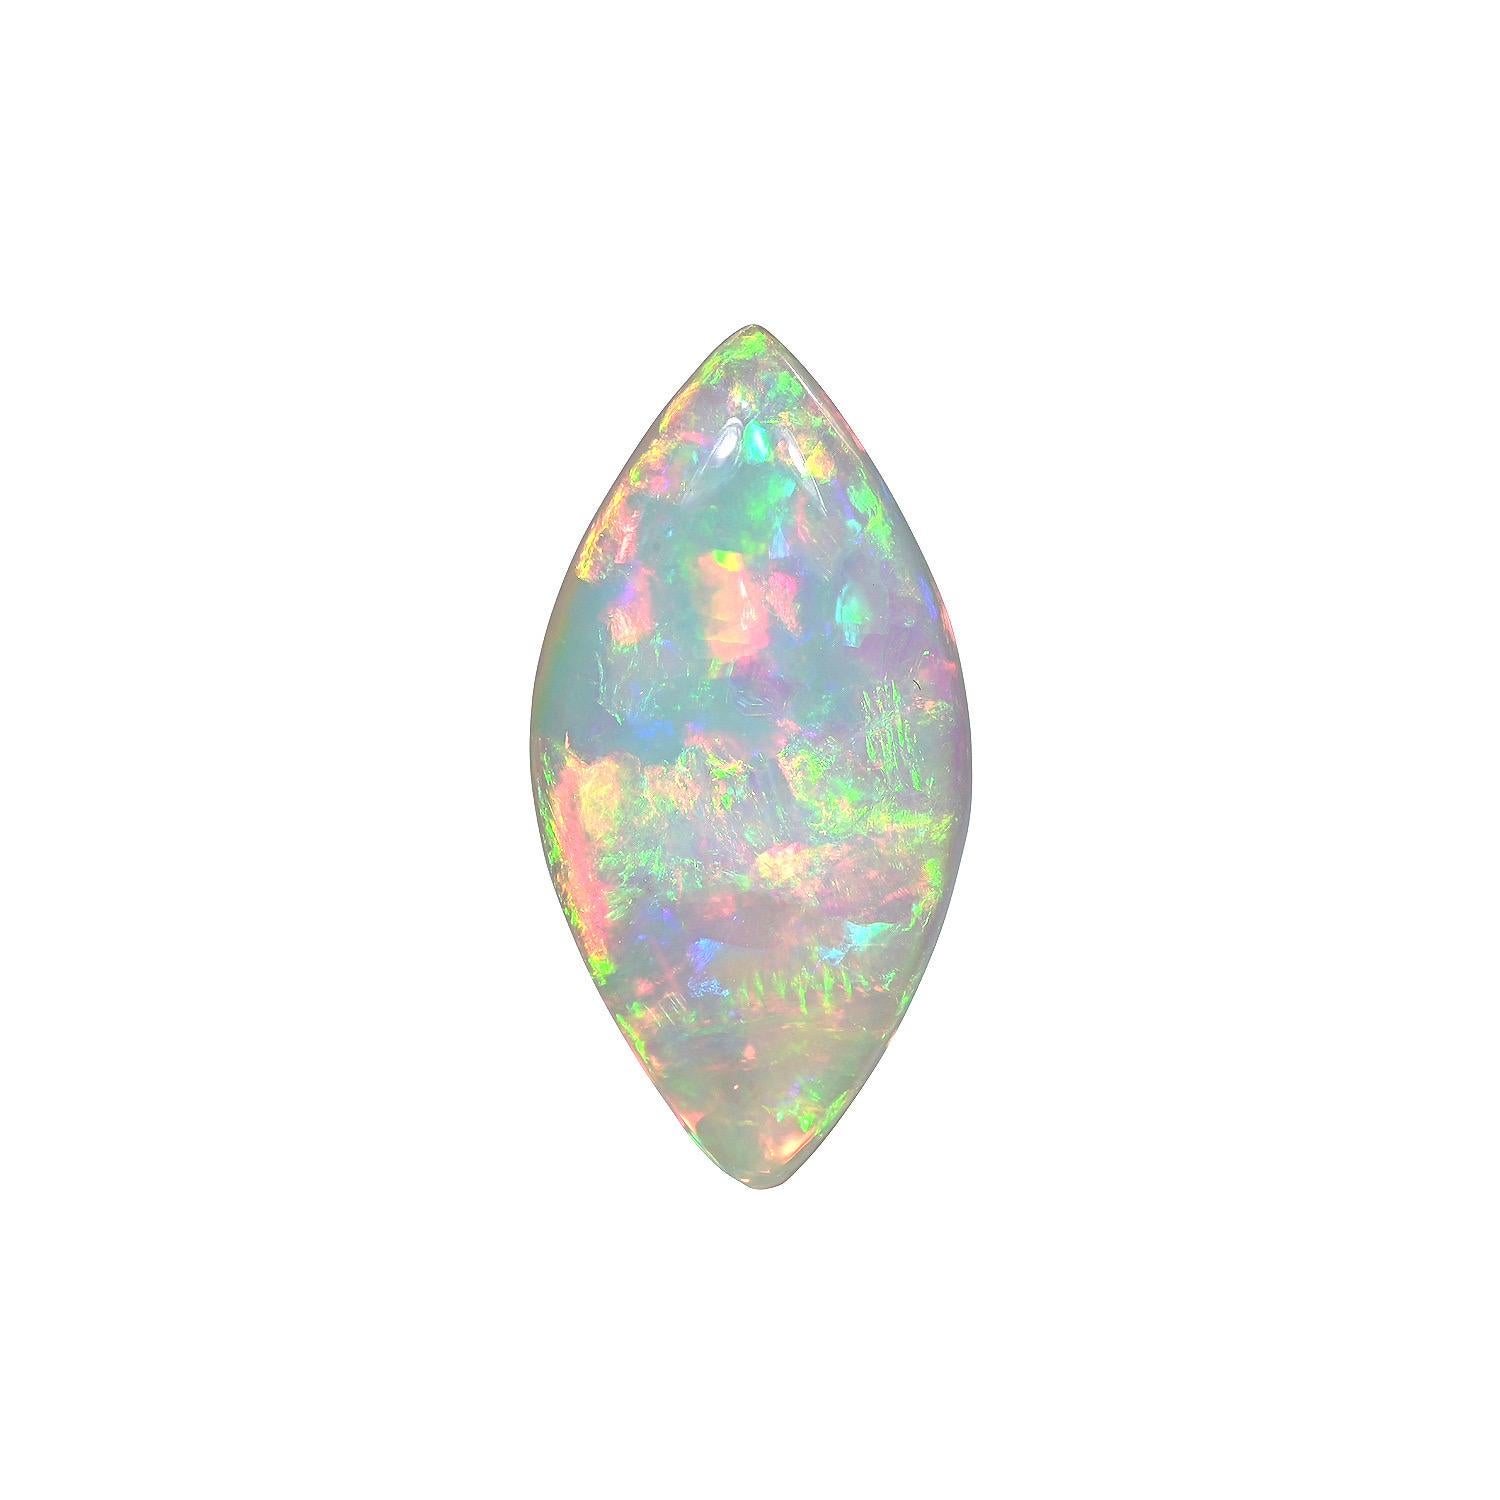 Natural 13.88 carat Marquise Ethiopian Opal loose gemstone, offered unmounted to a fine gem lover.
Returns are accepted and paid by us within 7 days of delivery.
We offer supreme custom jewelry work upon request. Please contact us for more